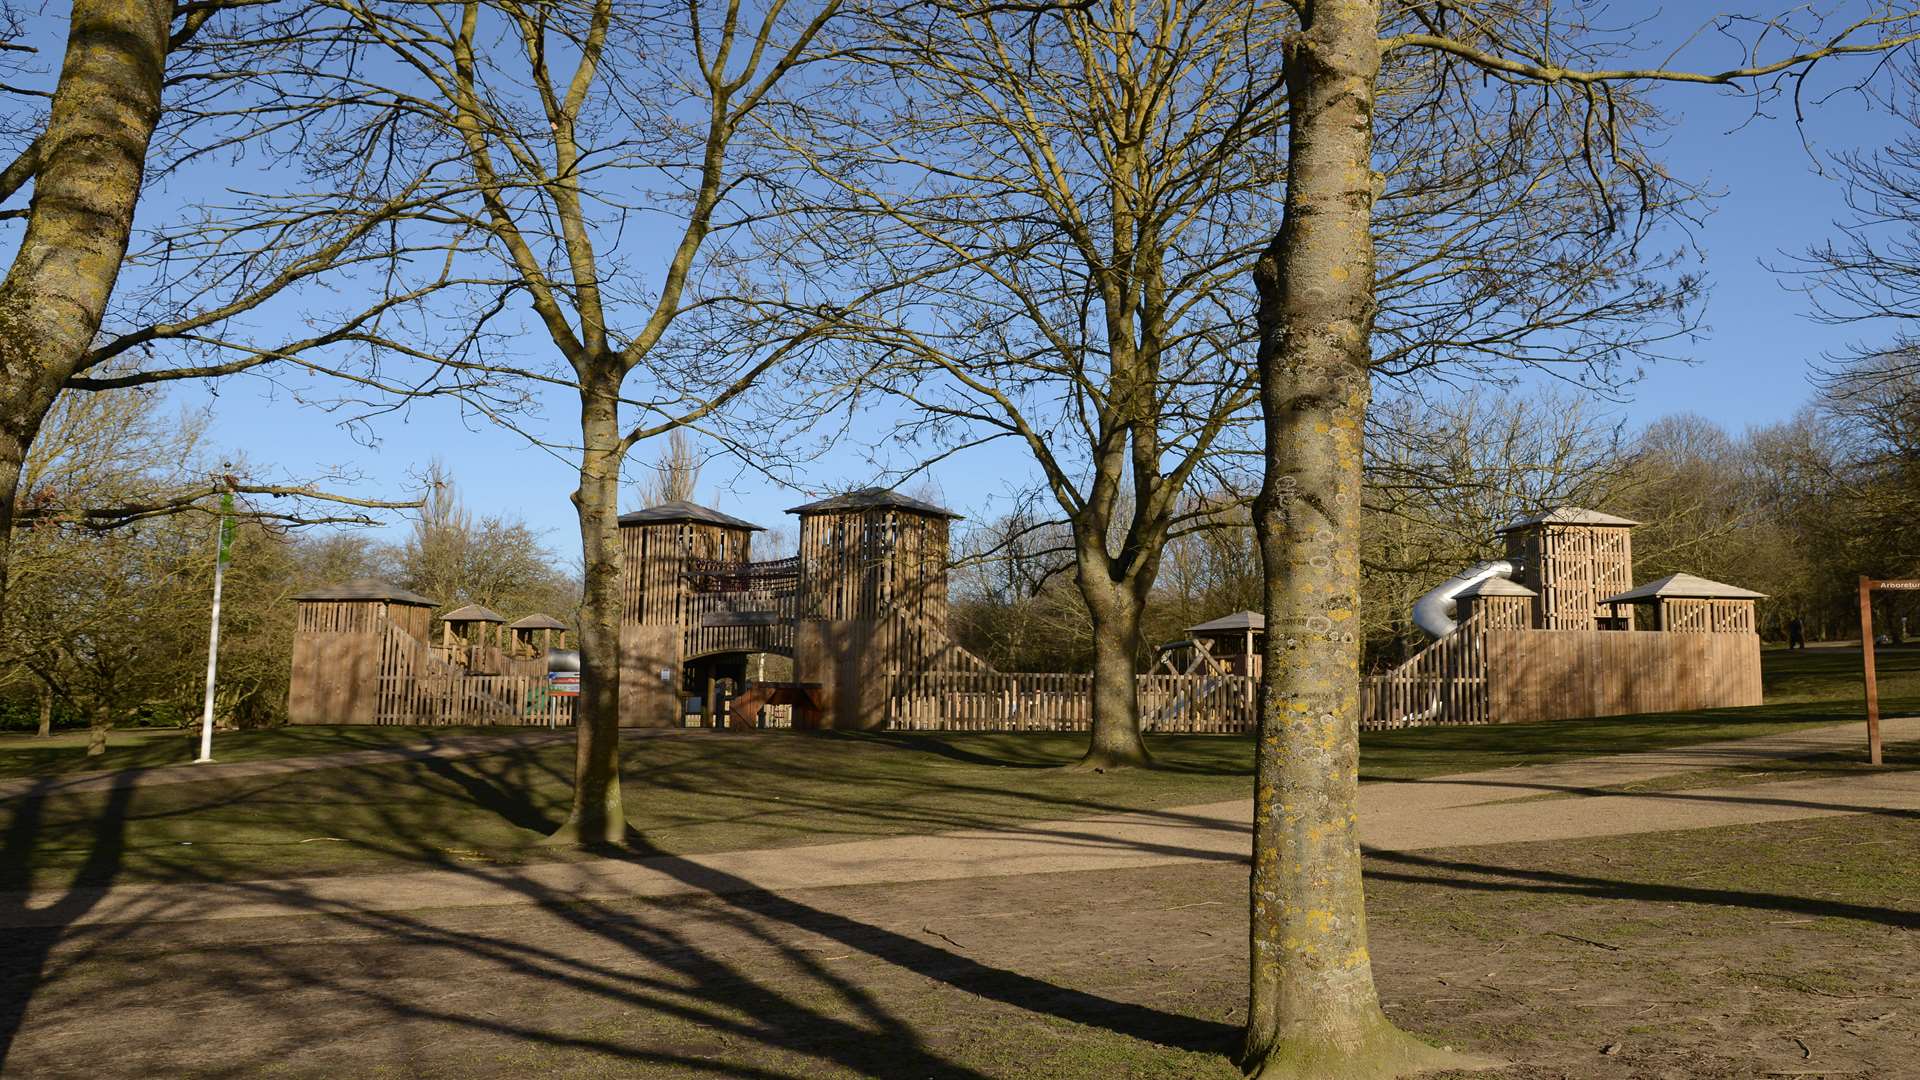 Cobtree Manor Park will have a new visitors centre opening in May